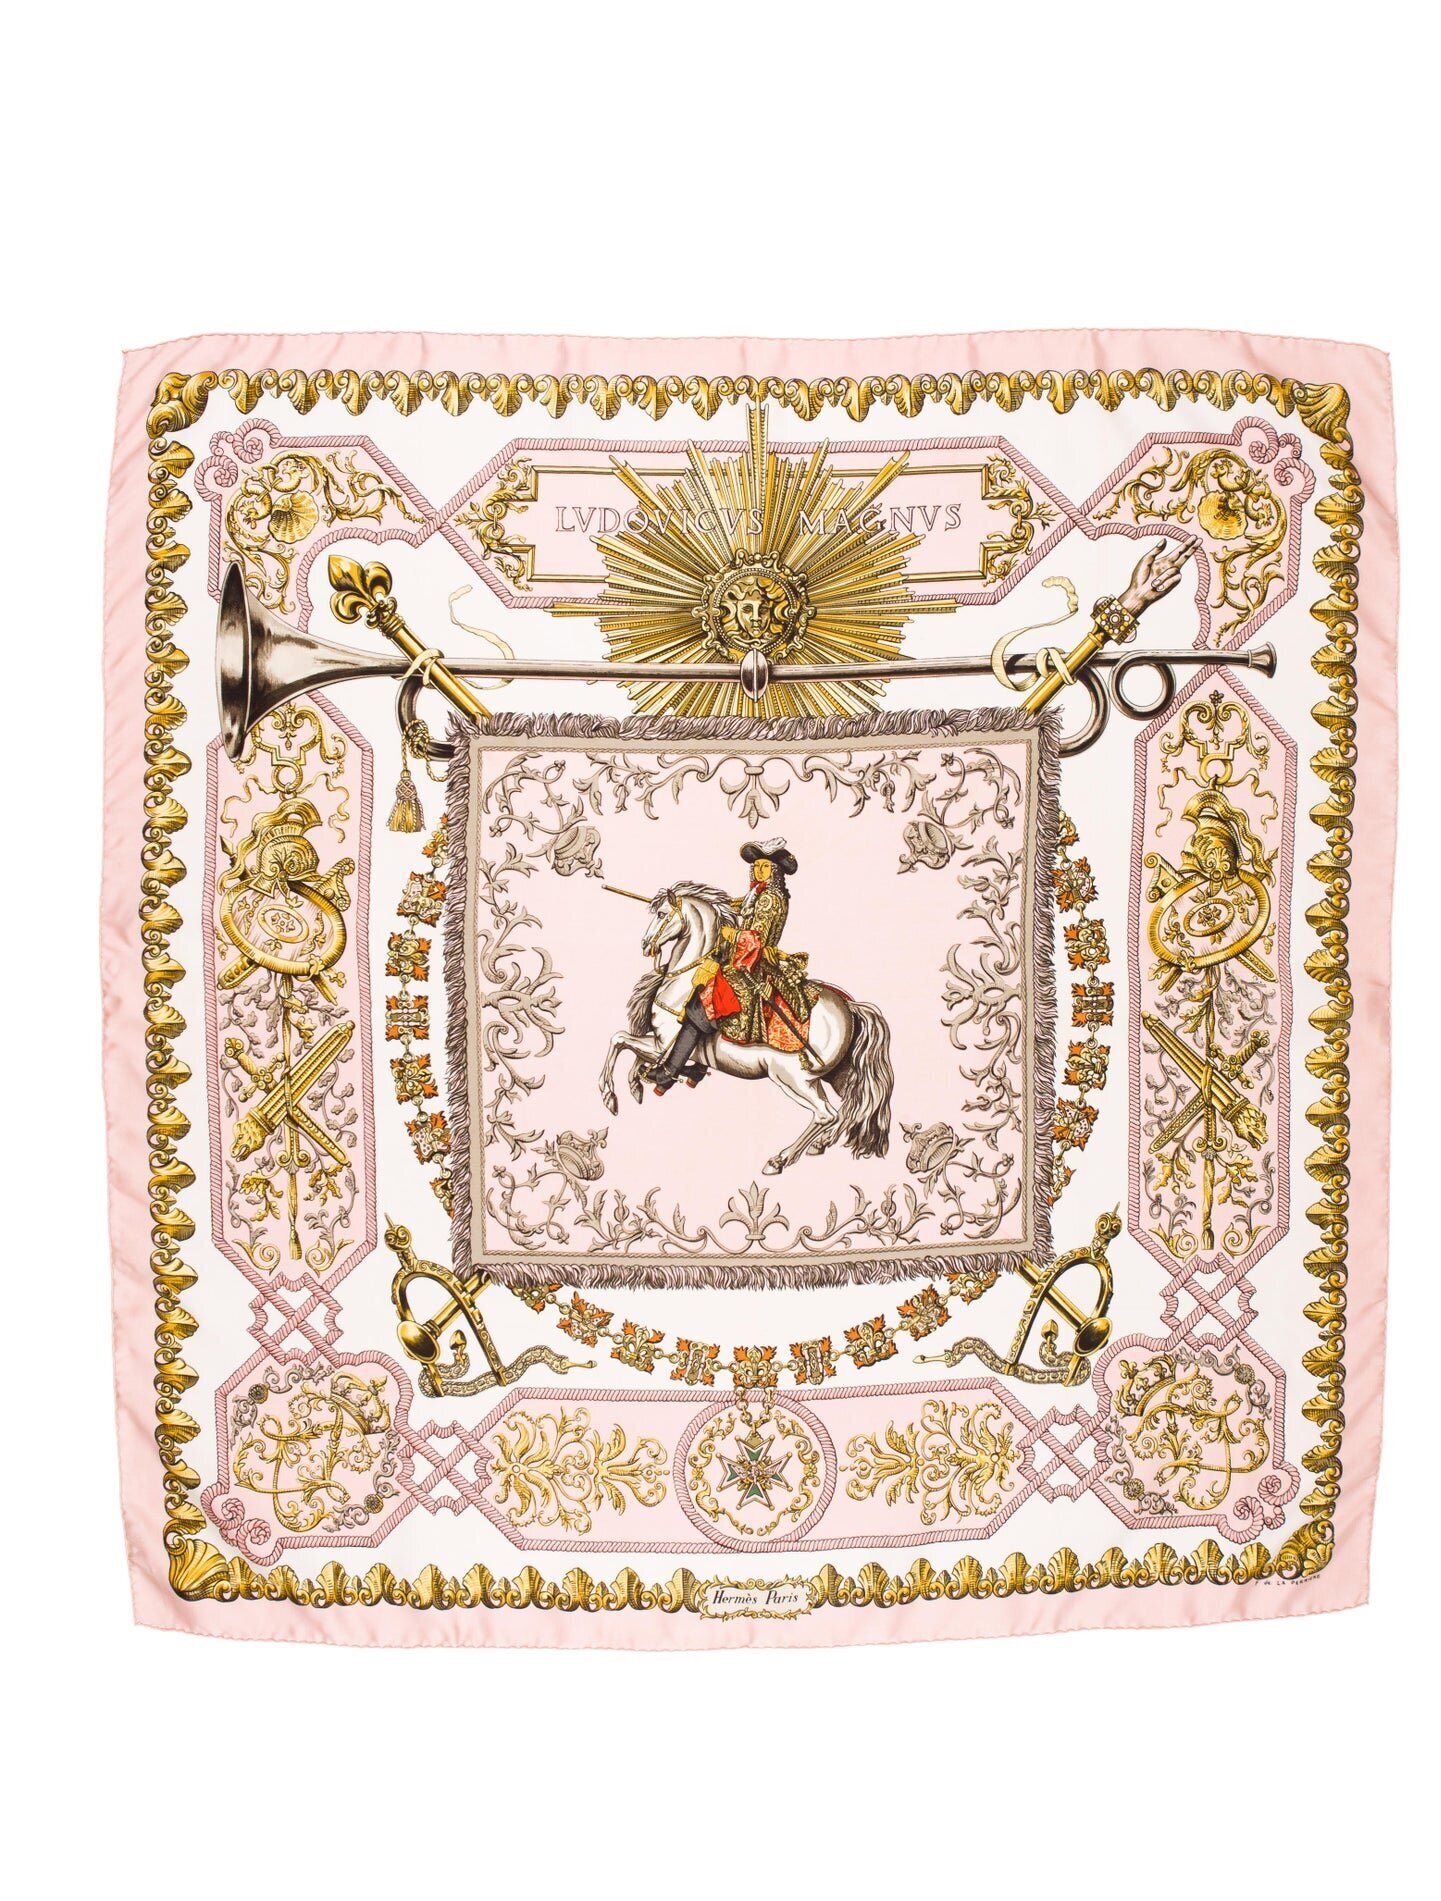  Hermes Scarf - Second Hand from The Real Real 